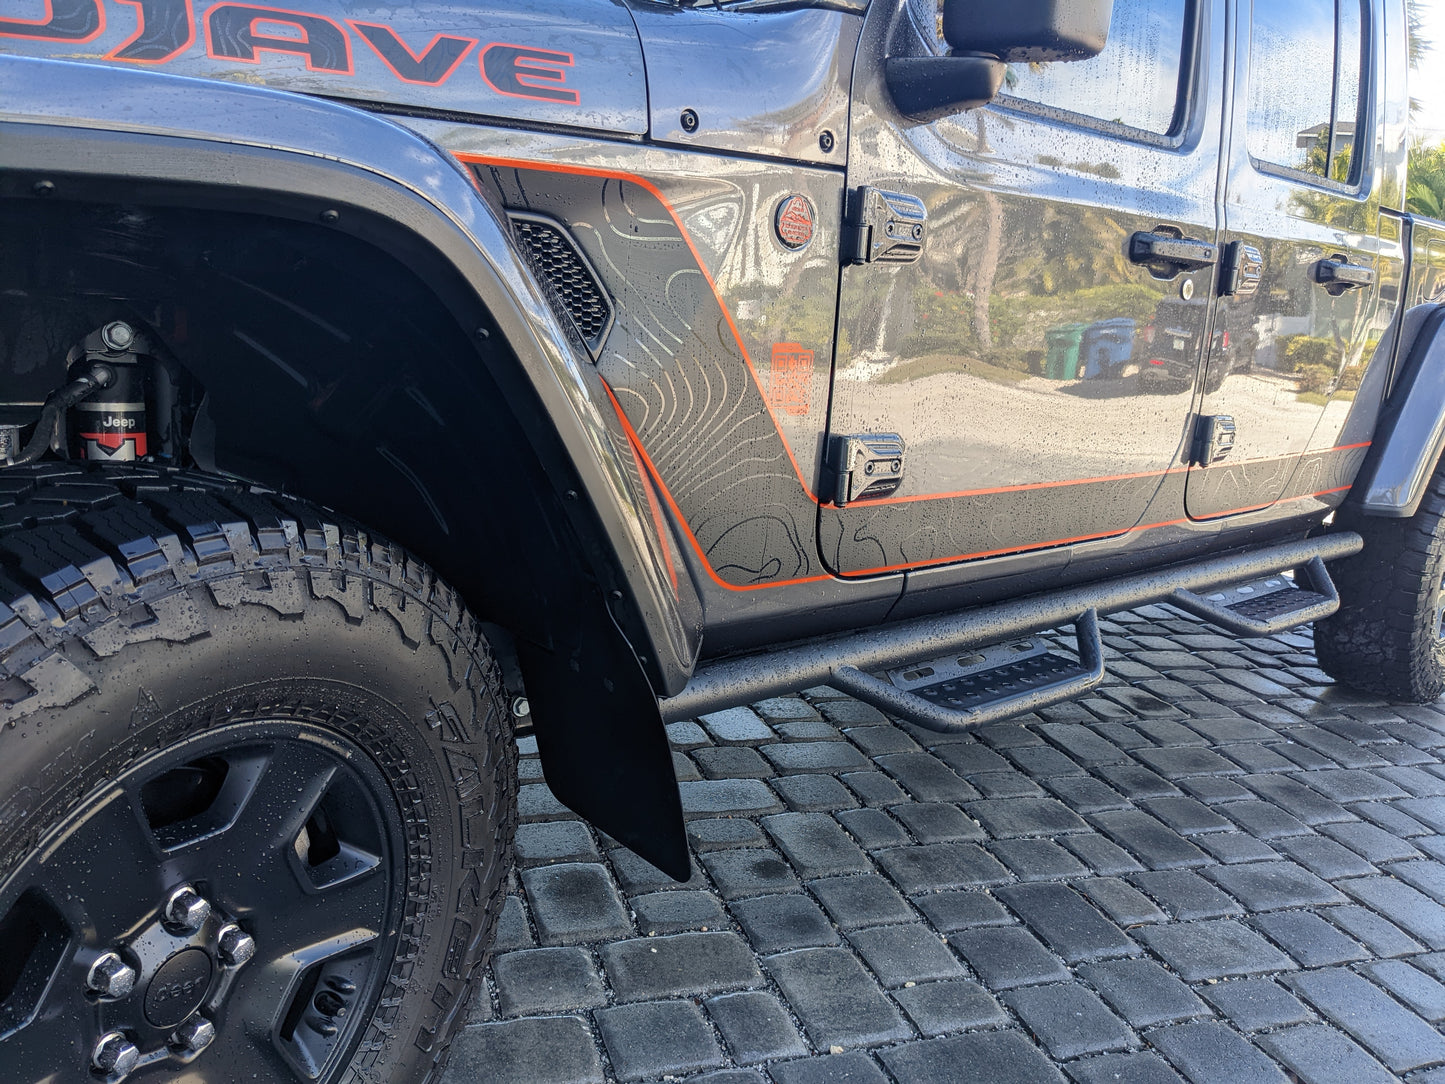 Gladiator Scrambler Style Topographical Red Line Rubicon Blackout Stripe Decal Set- fits 2020 and Newer Jeep Gladiator